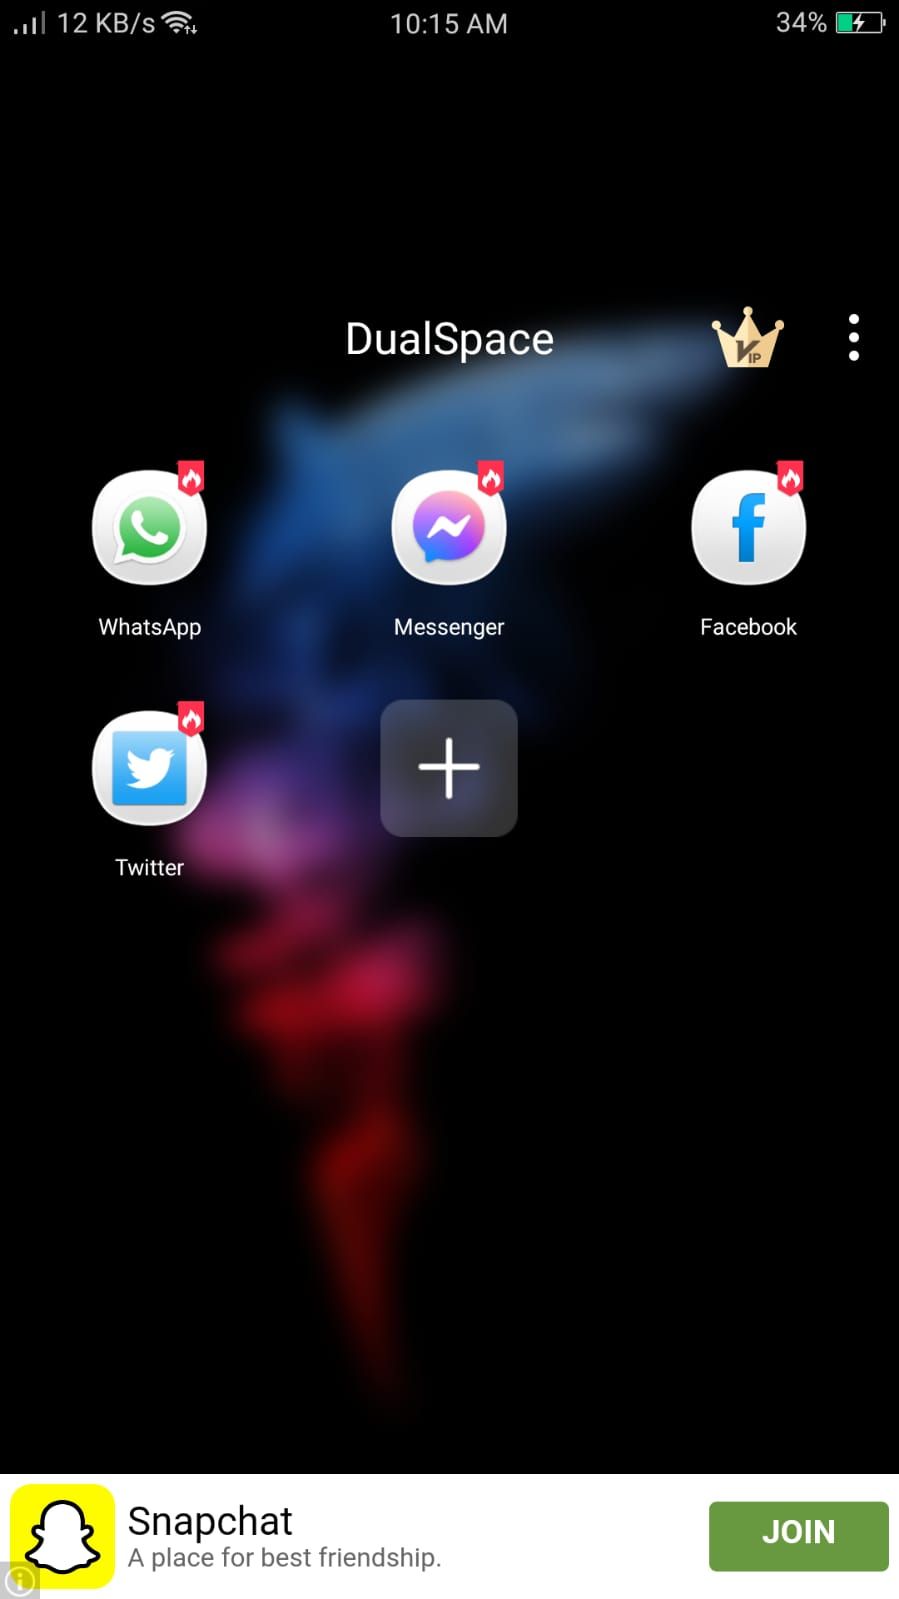 Dual Space - Home Page with Available Apps to Clone